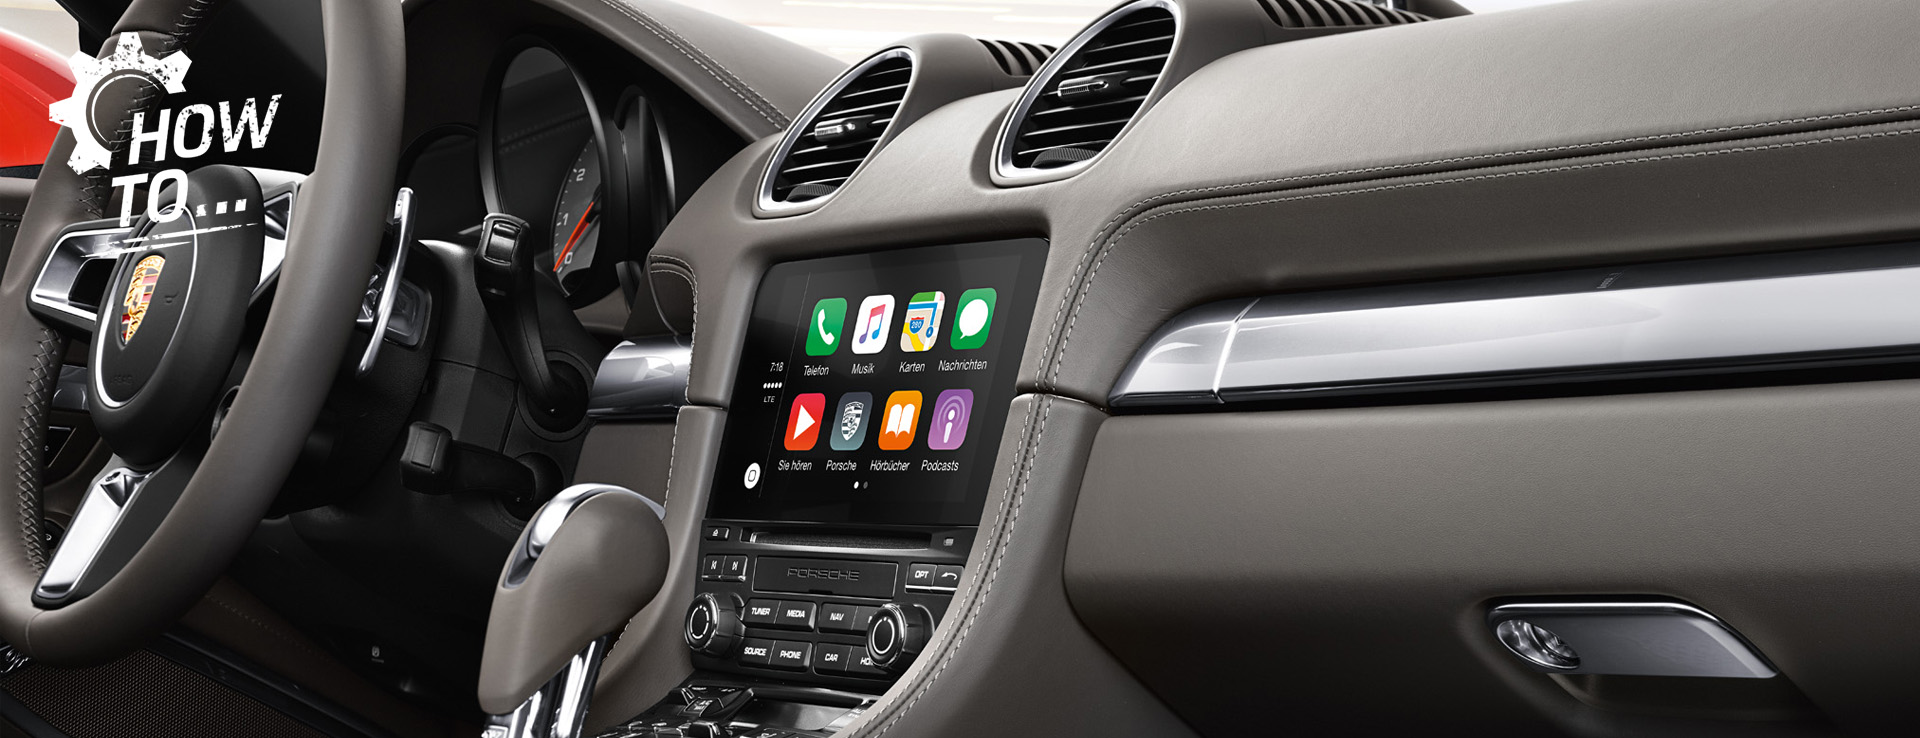 Dashboard of Porsche Cayenne with Apple CarPlay on centre display